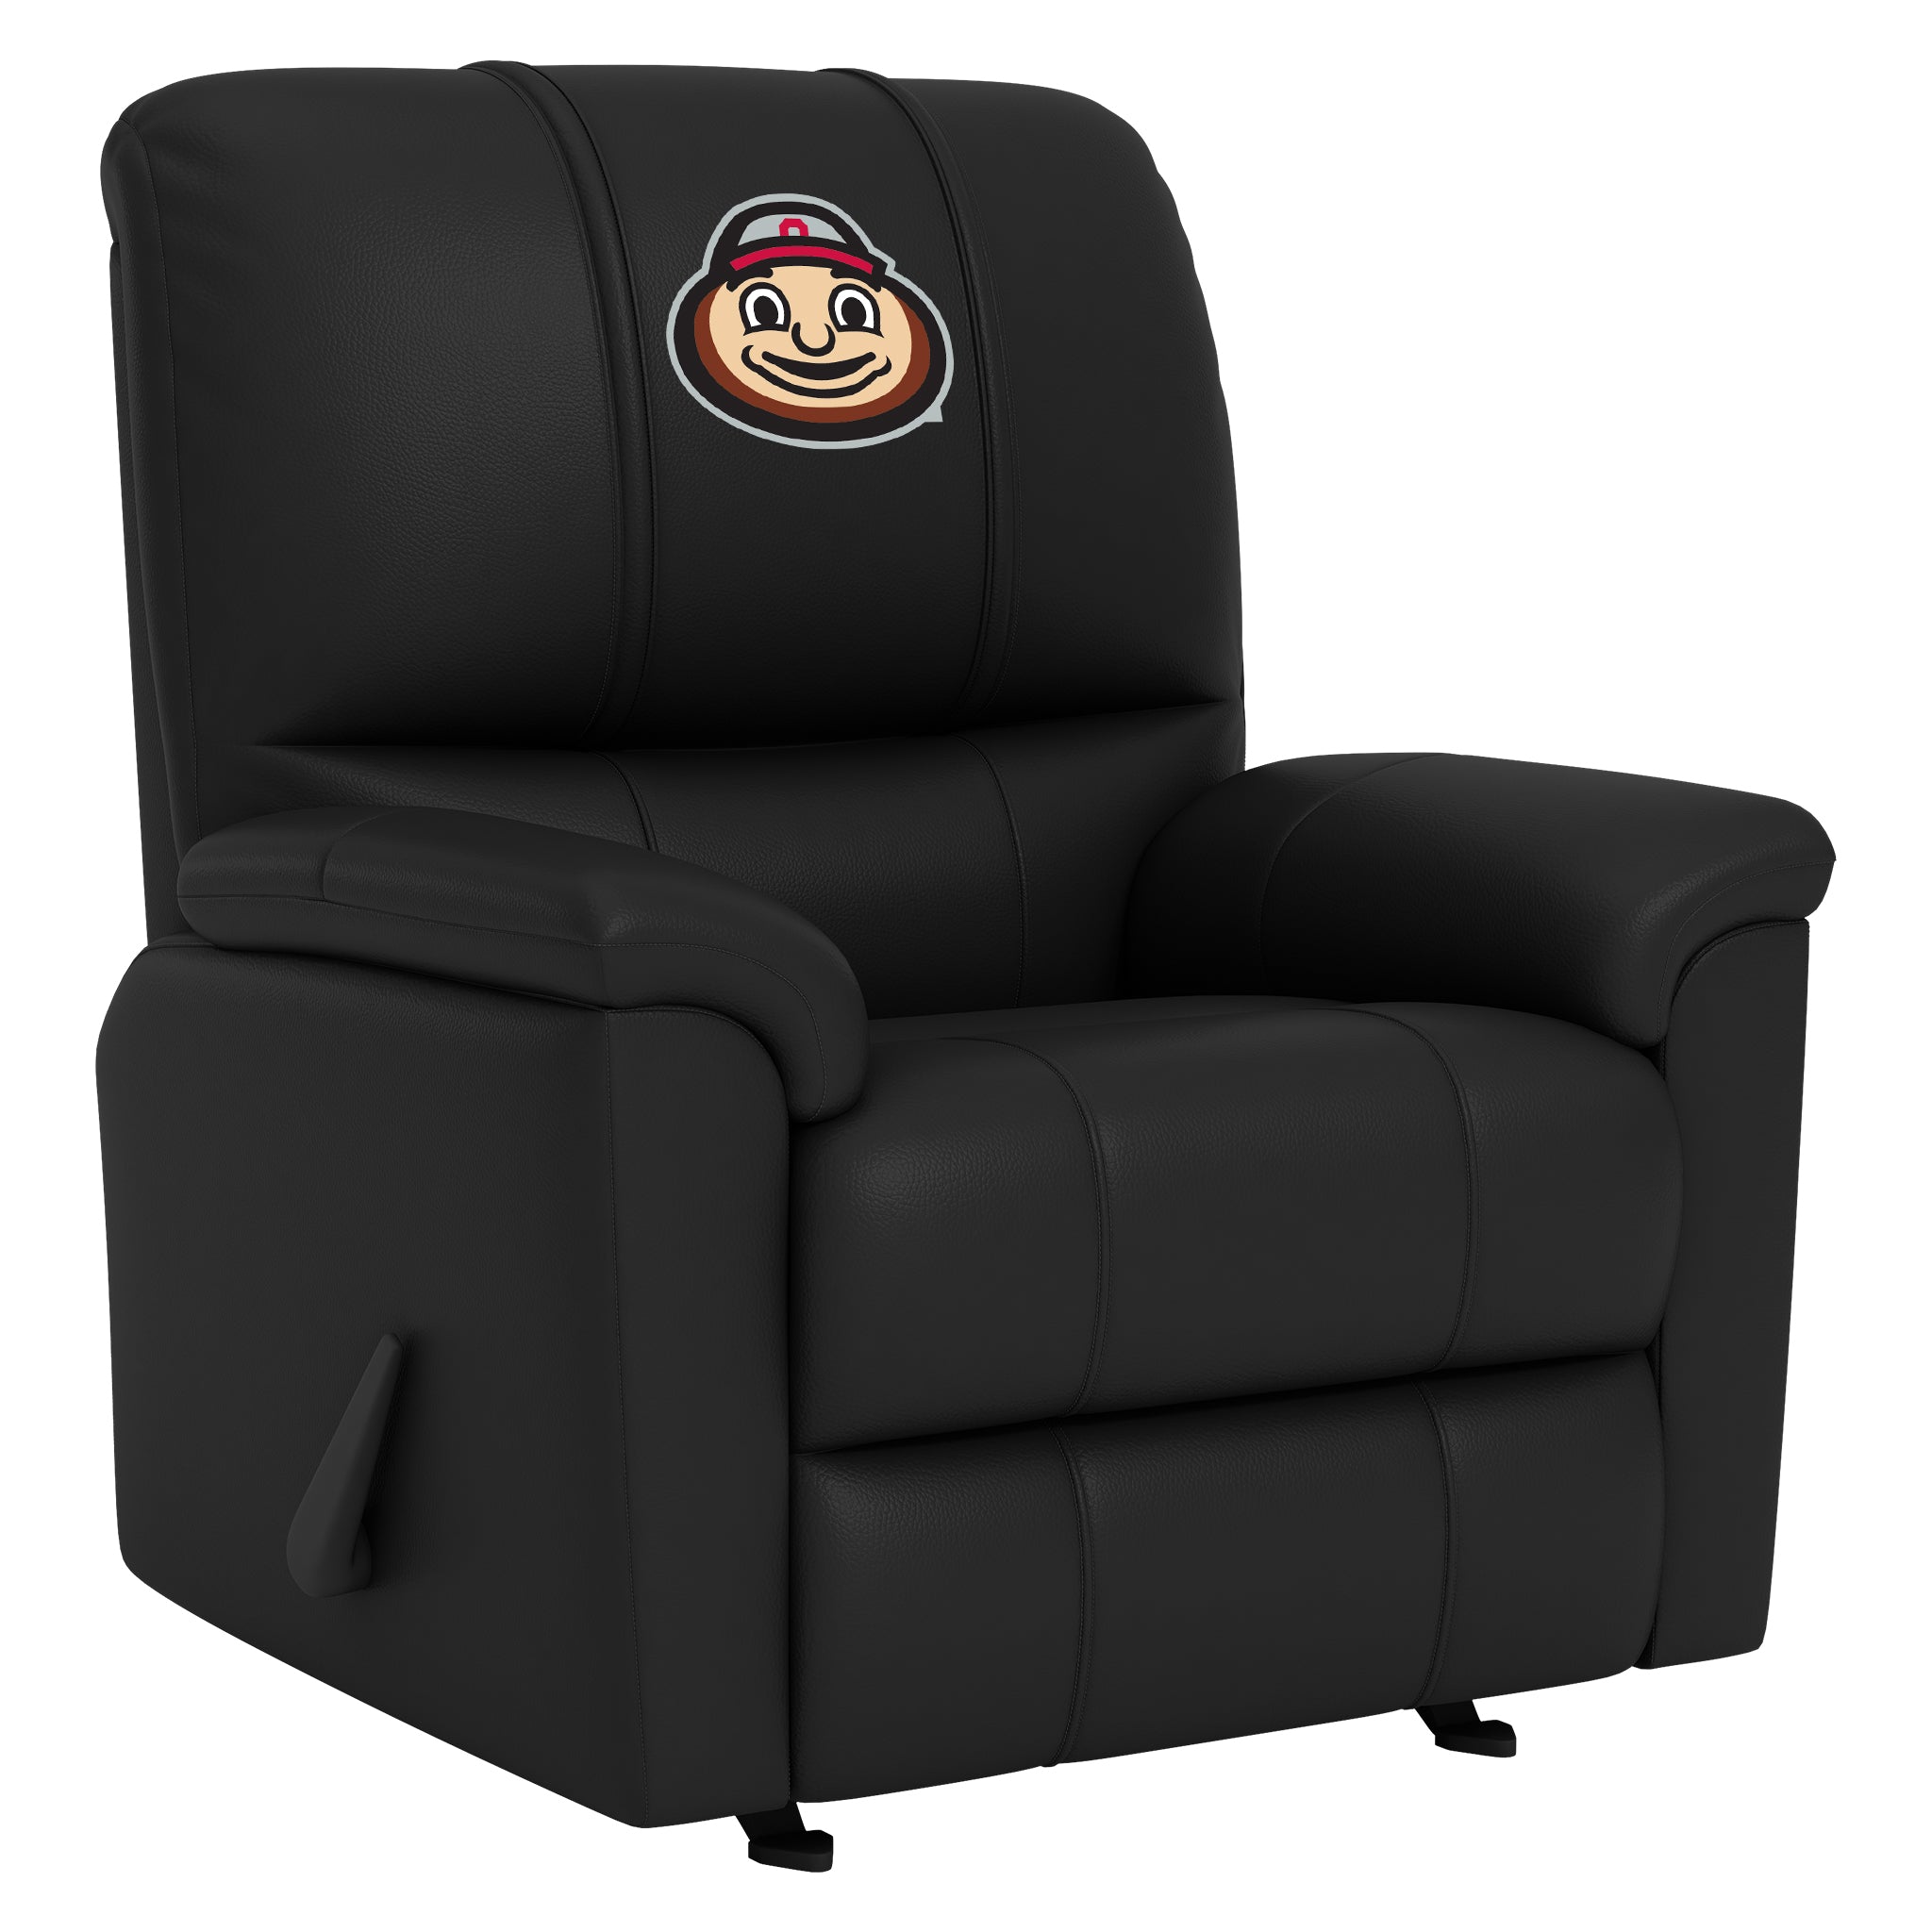 Ohio State Silver Club Chair with Ohio State Buckeyes Brutus Head Logo